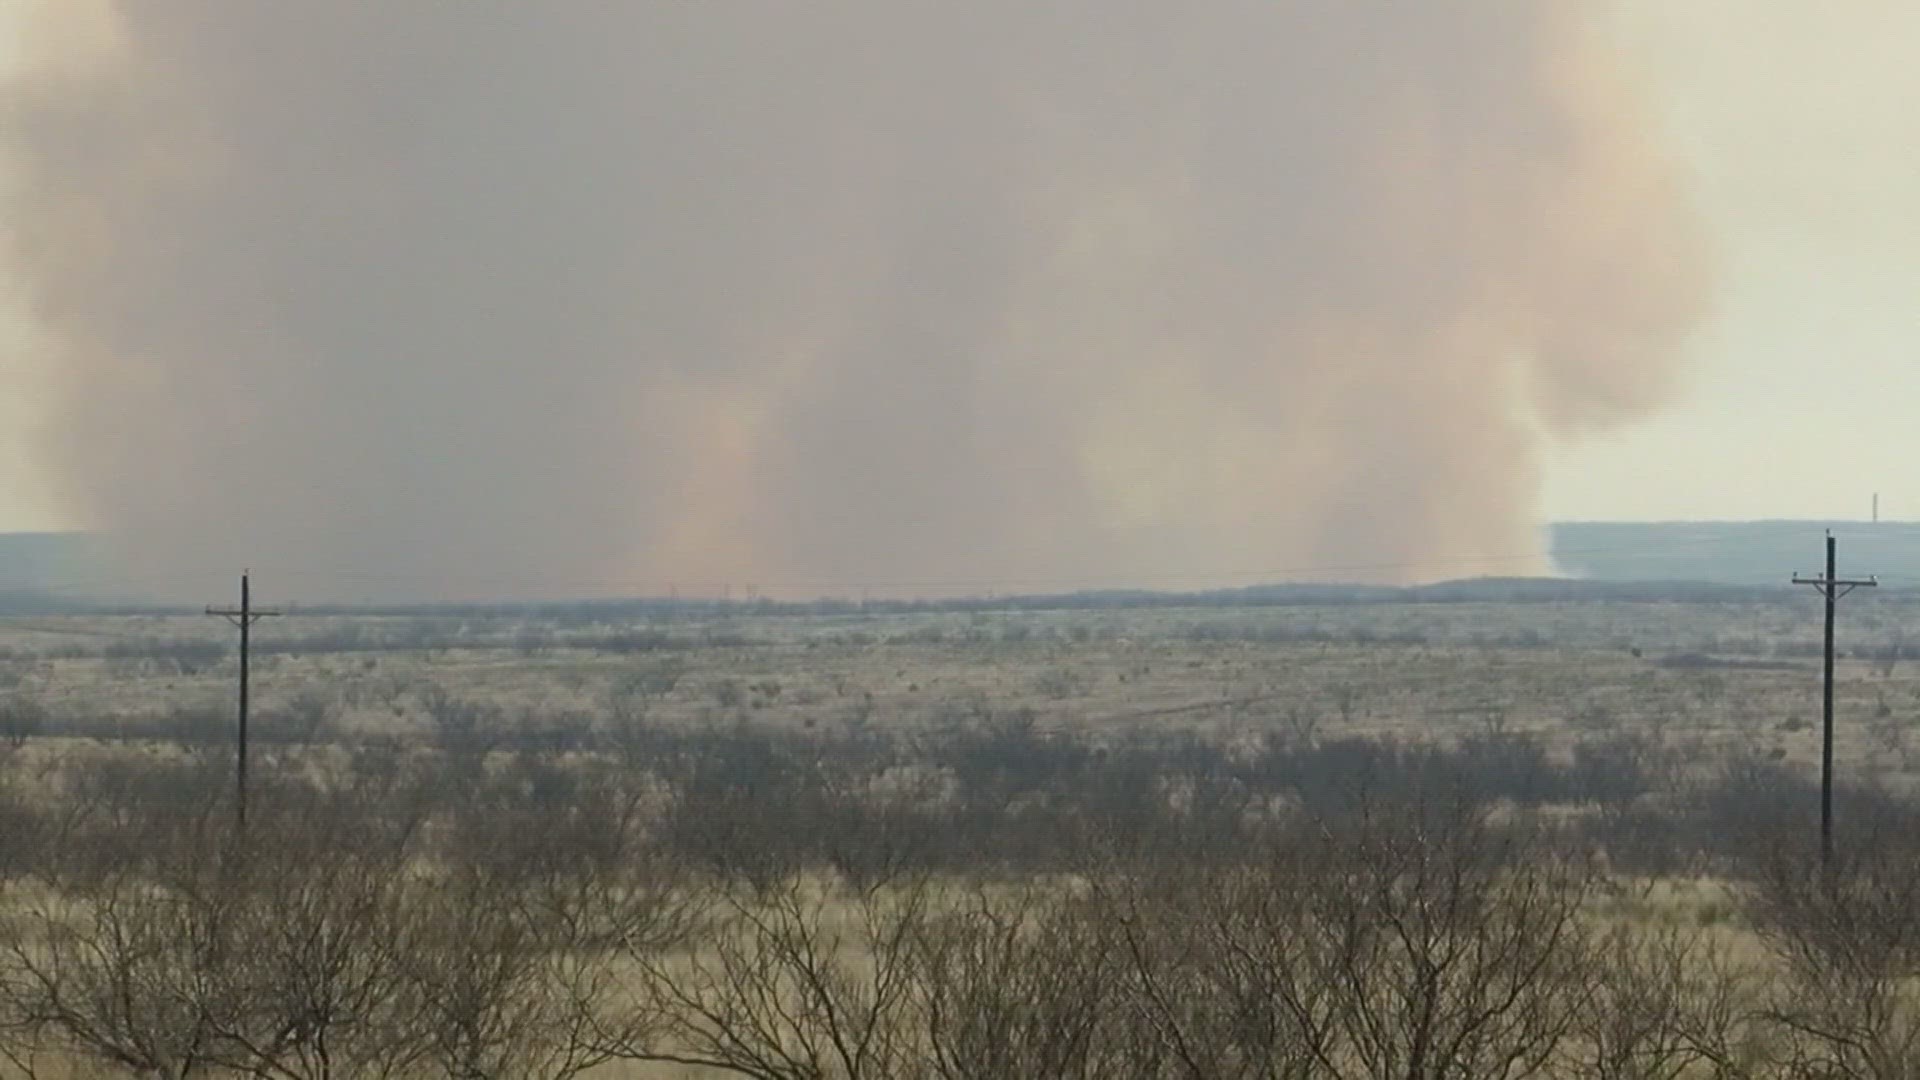 The Texas Agriculture Commissioner explains why the 200 some firefighters have struggled against this giant blaze.